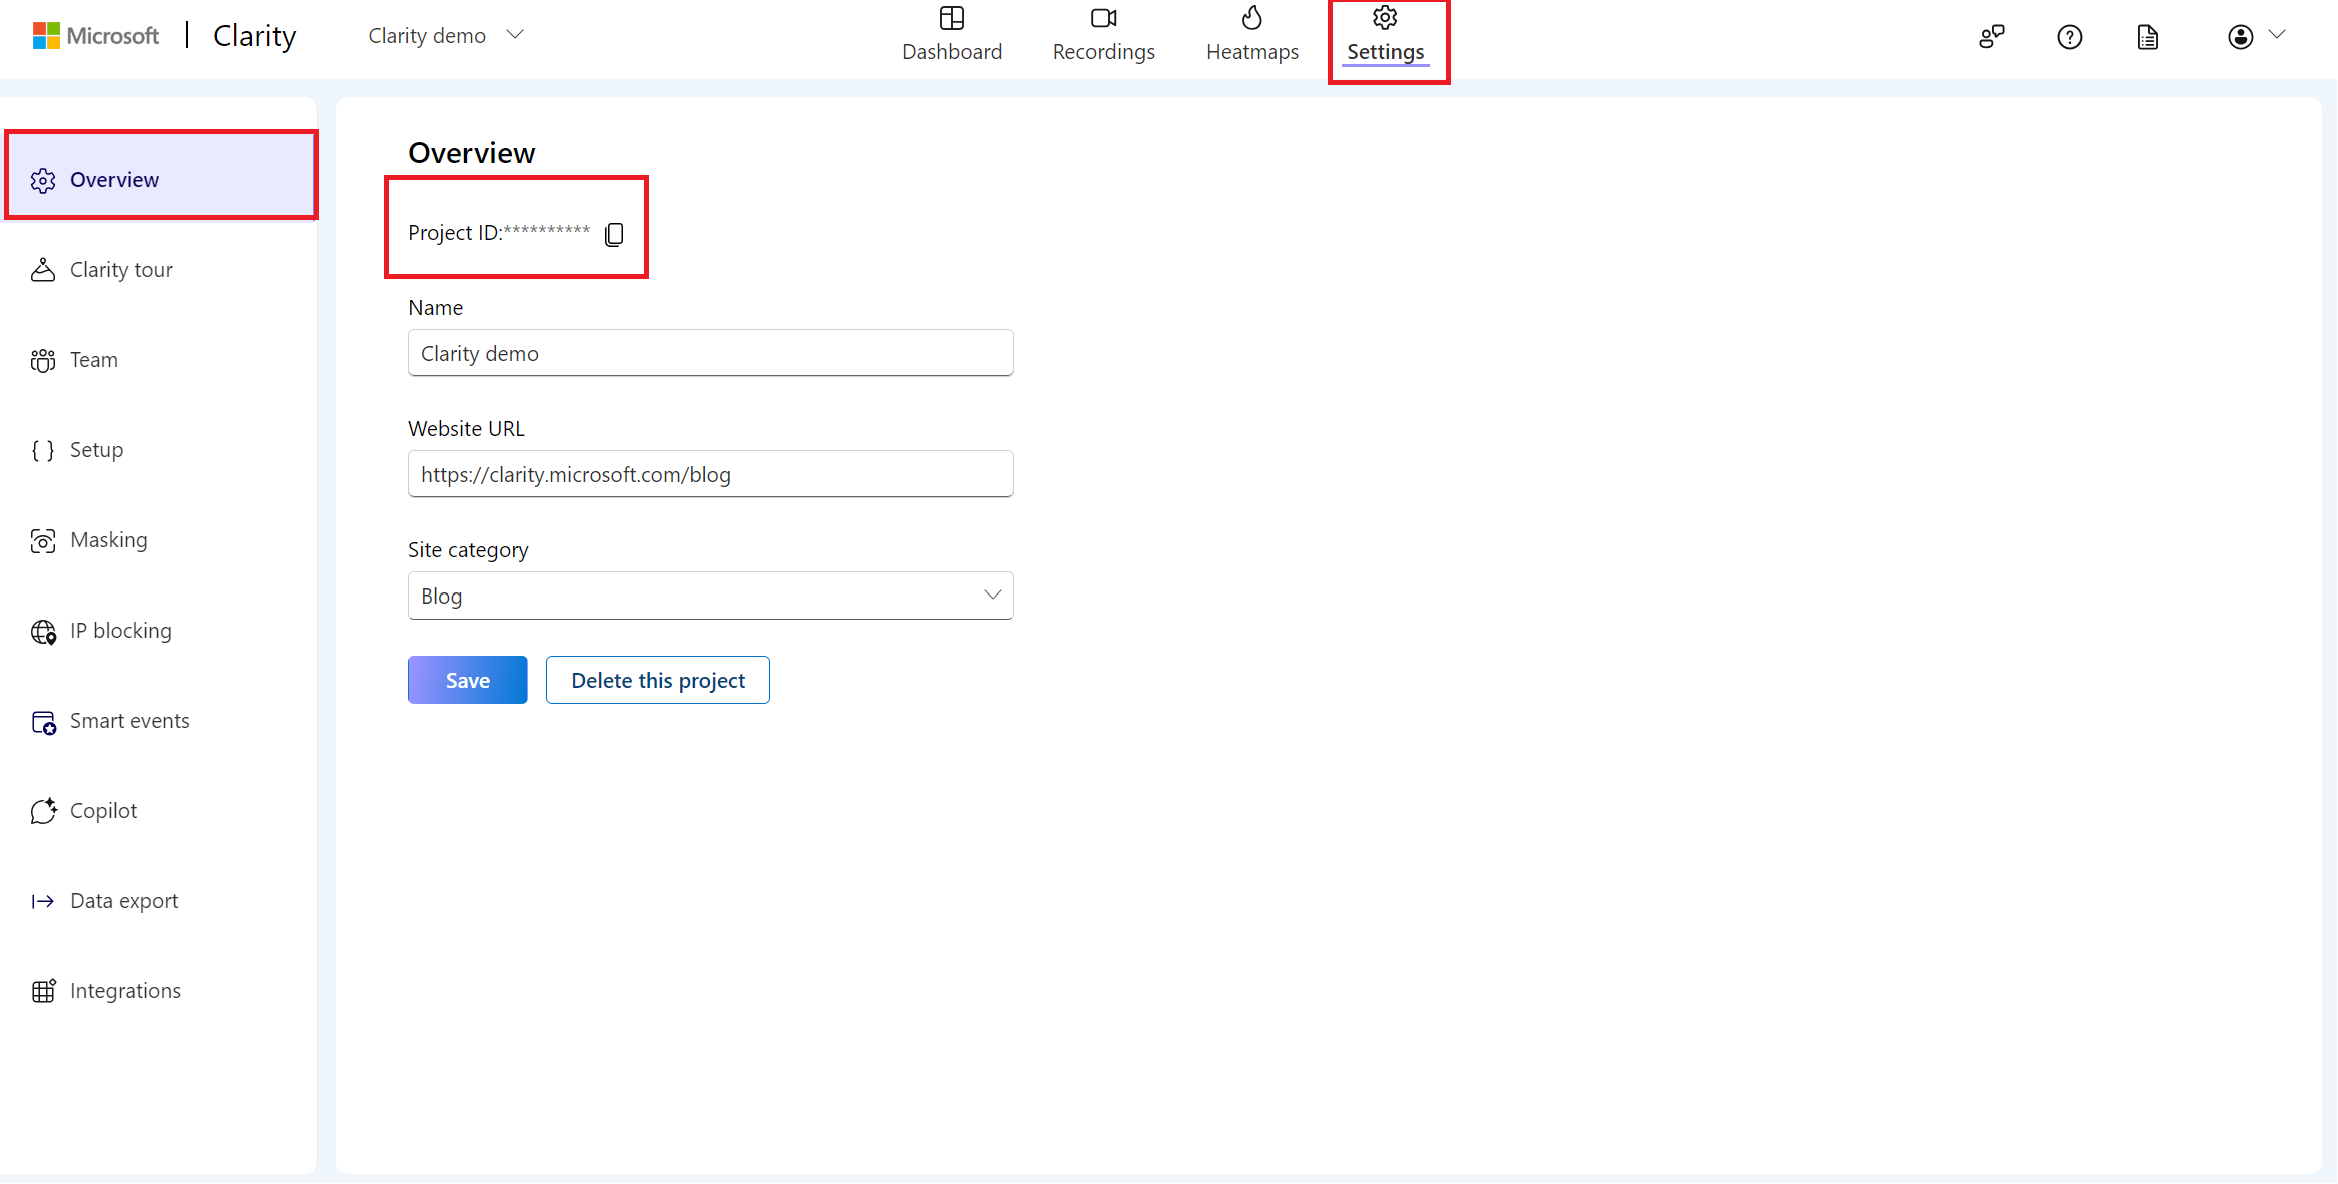 Copy your Clarity project ID for SharePoint.